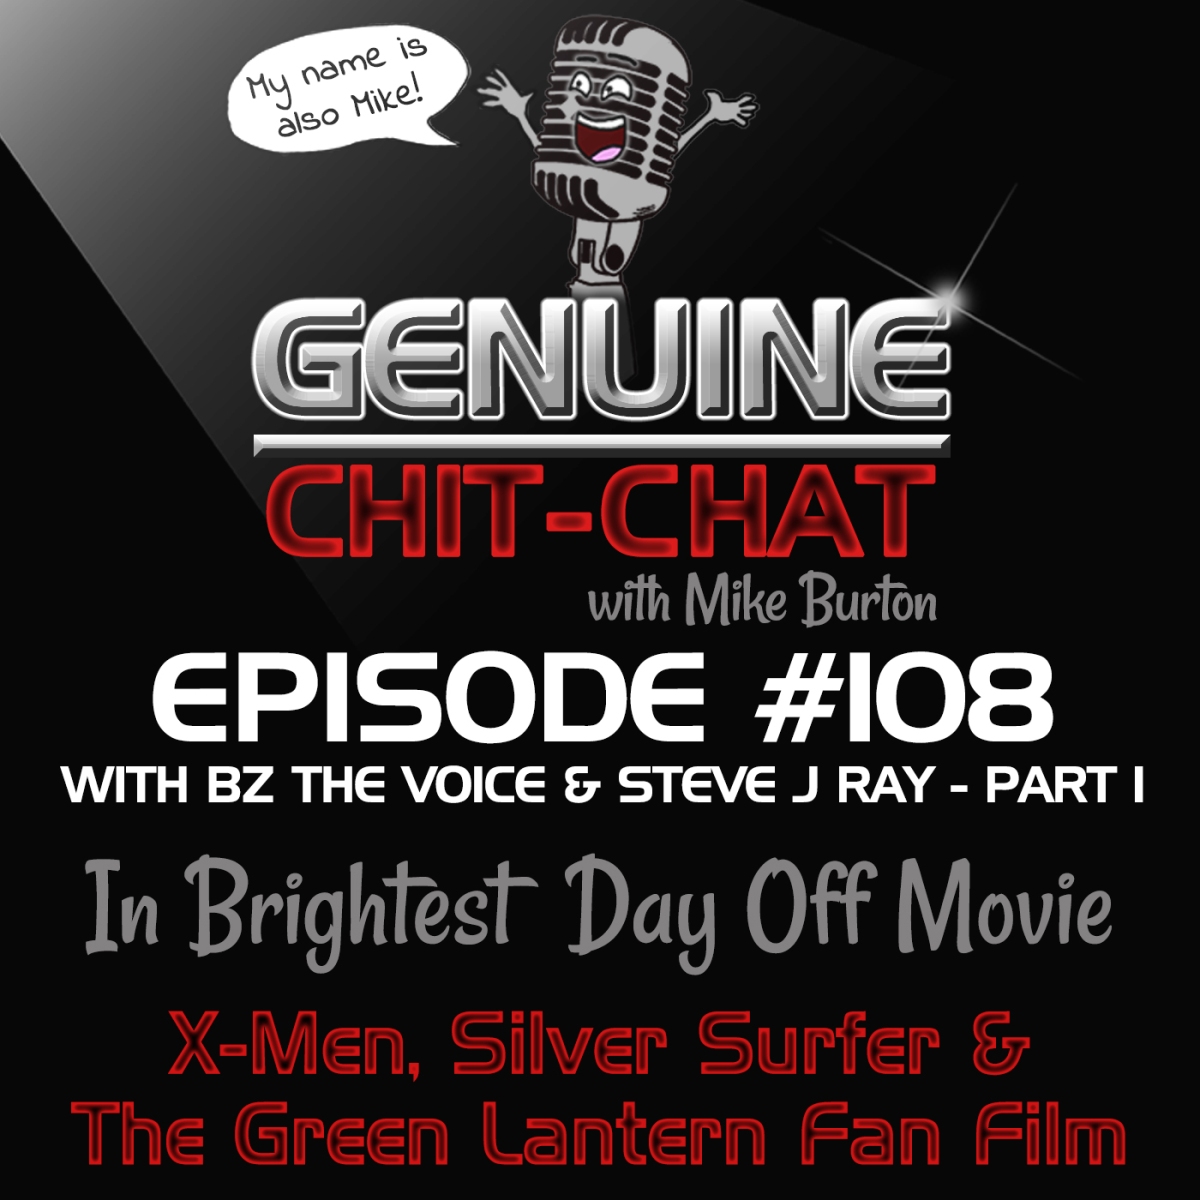 #108 Pt 1 – In Brightest Day Off Movie: X-Men, Silver Surfer & The Green Lantern Fan Film With BZ The Voice & Steve J Ray